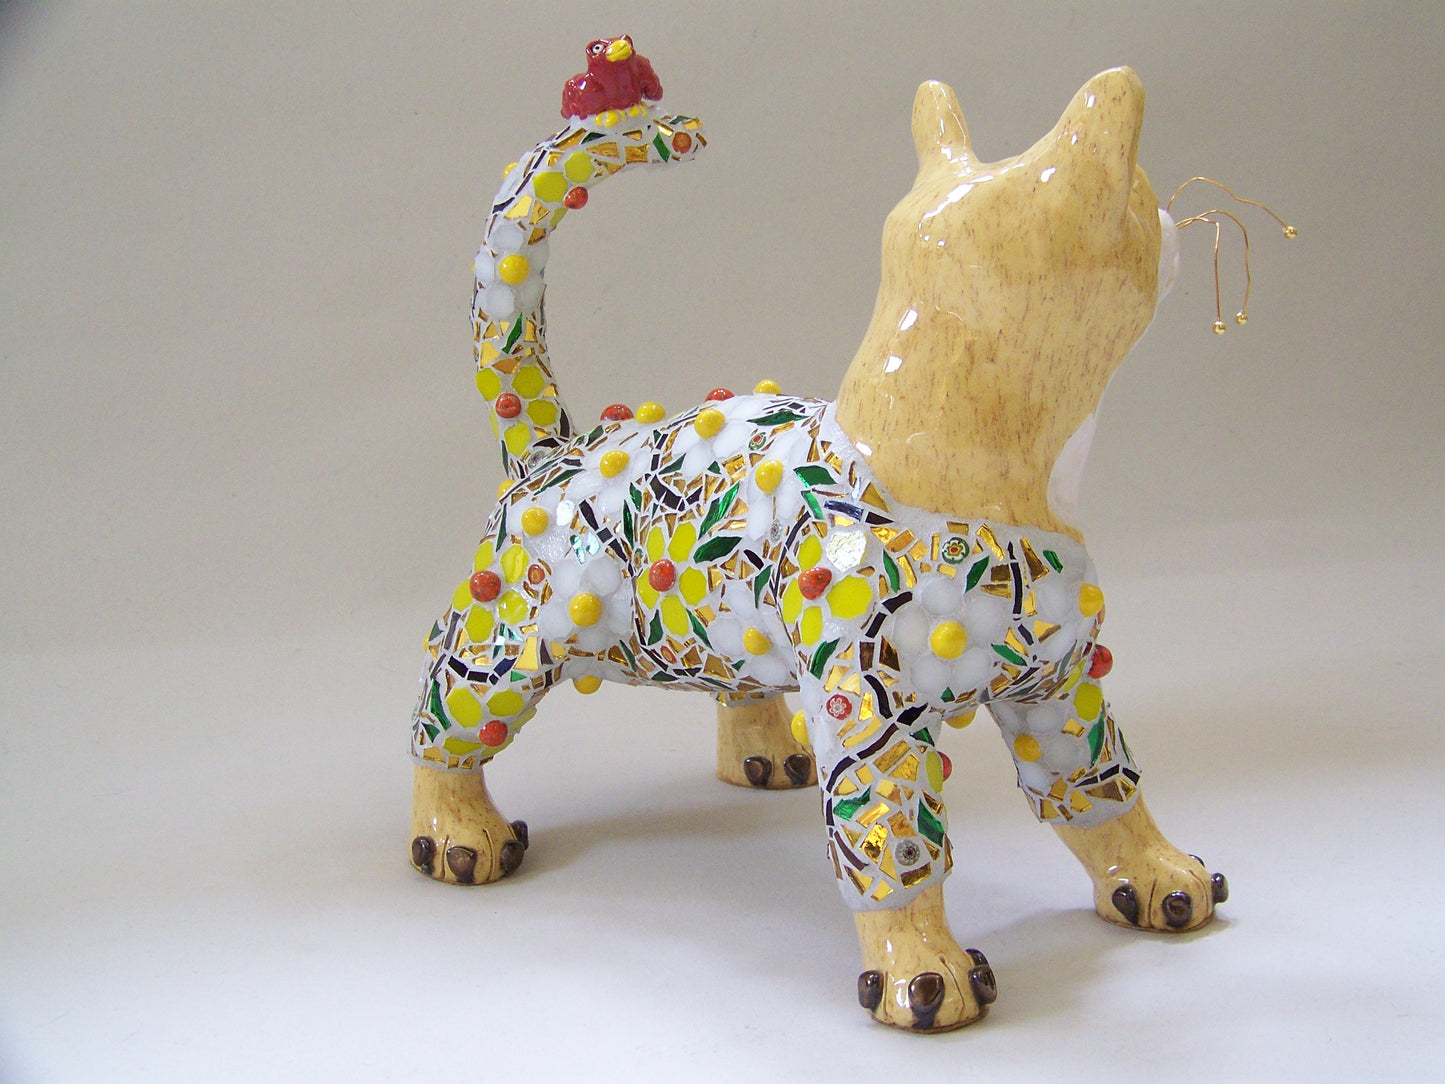 Flower Pattern Glass and Ceramic Mosaic Cat and Bird Sculpture